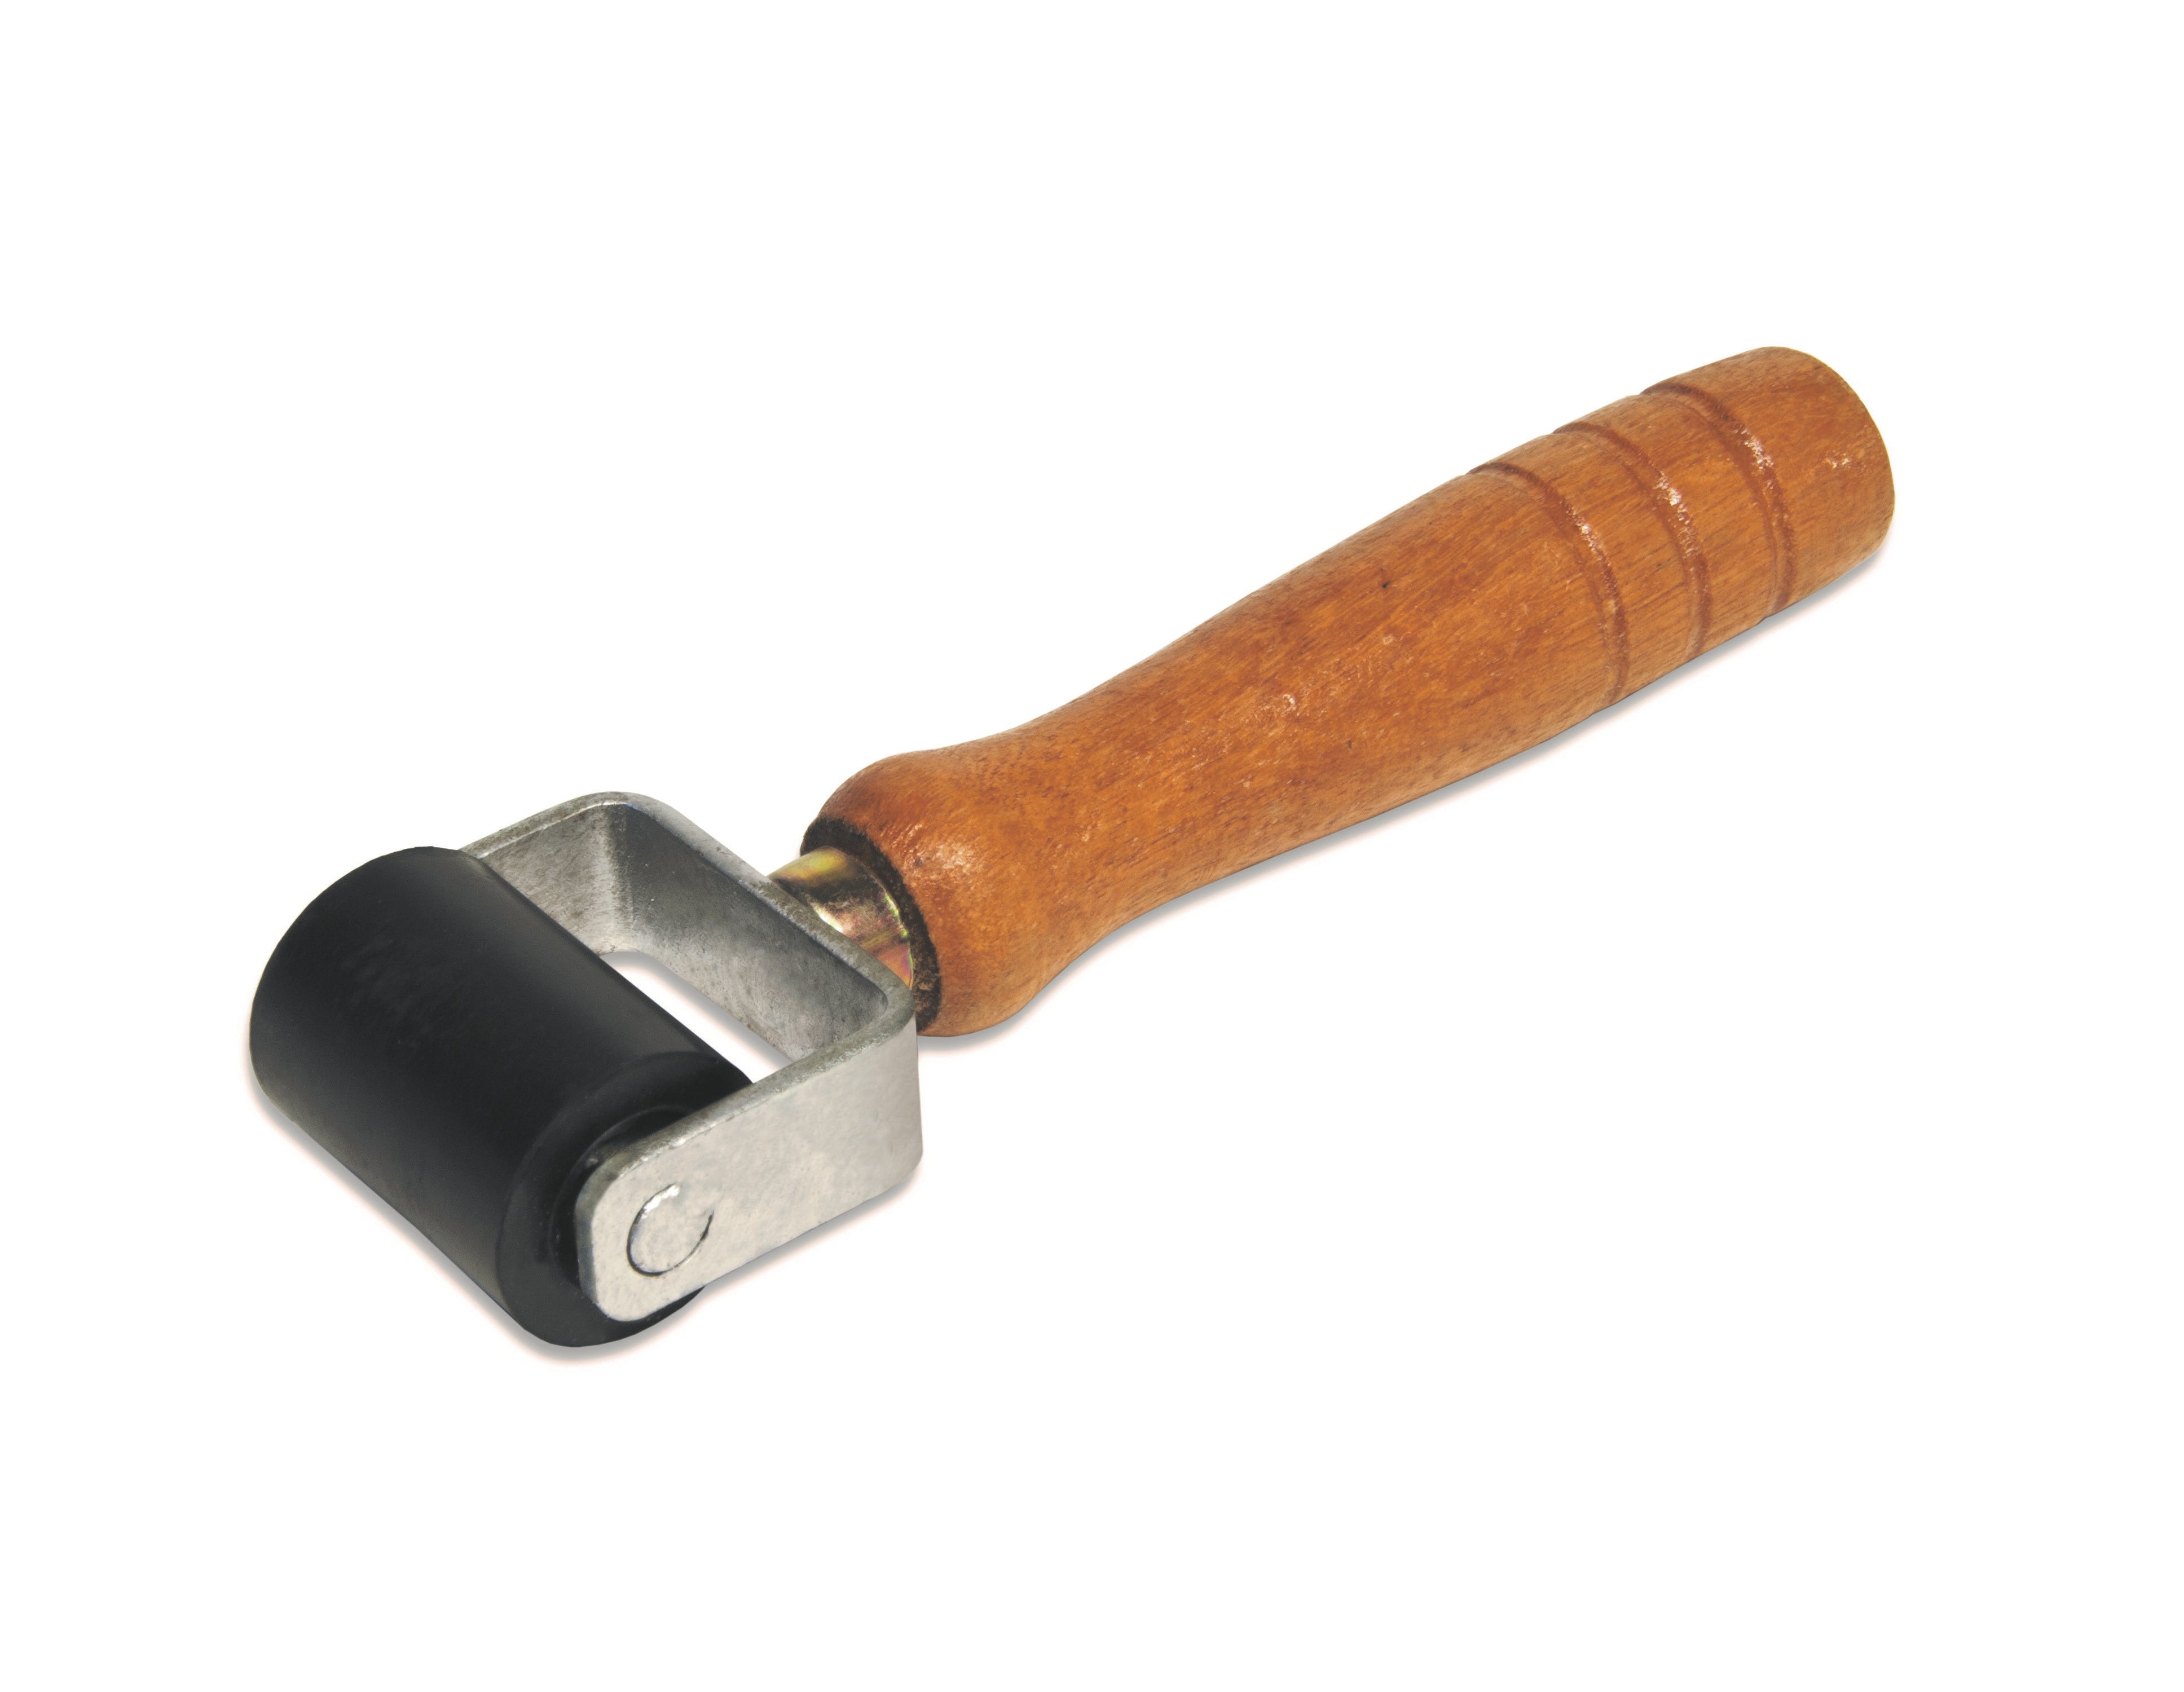 Grit Tape Applicator Roller - 2-1/2" Inch Wide Rubber Roller with Wooden Handle